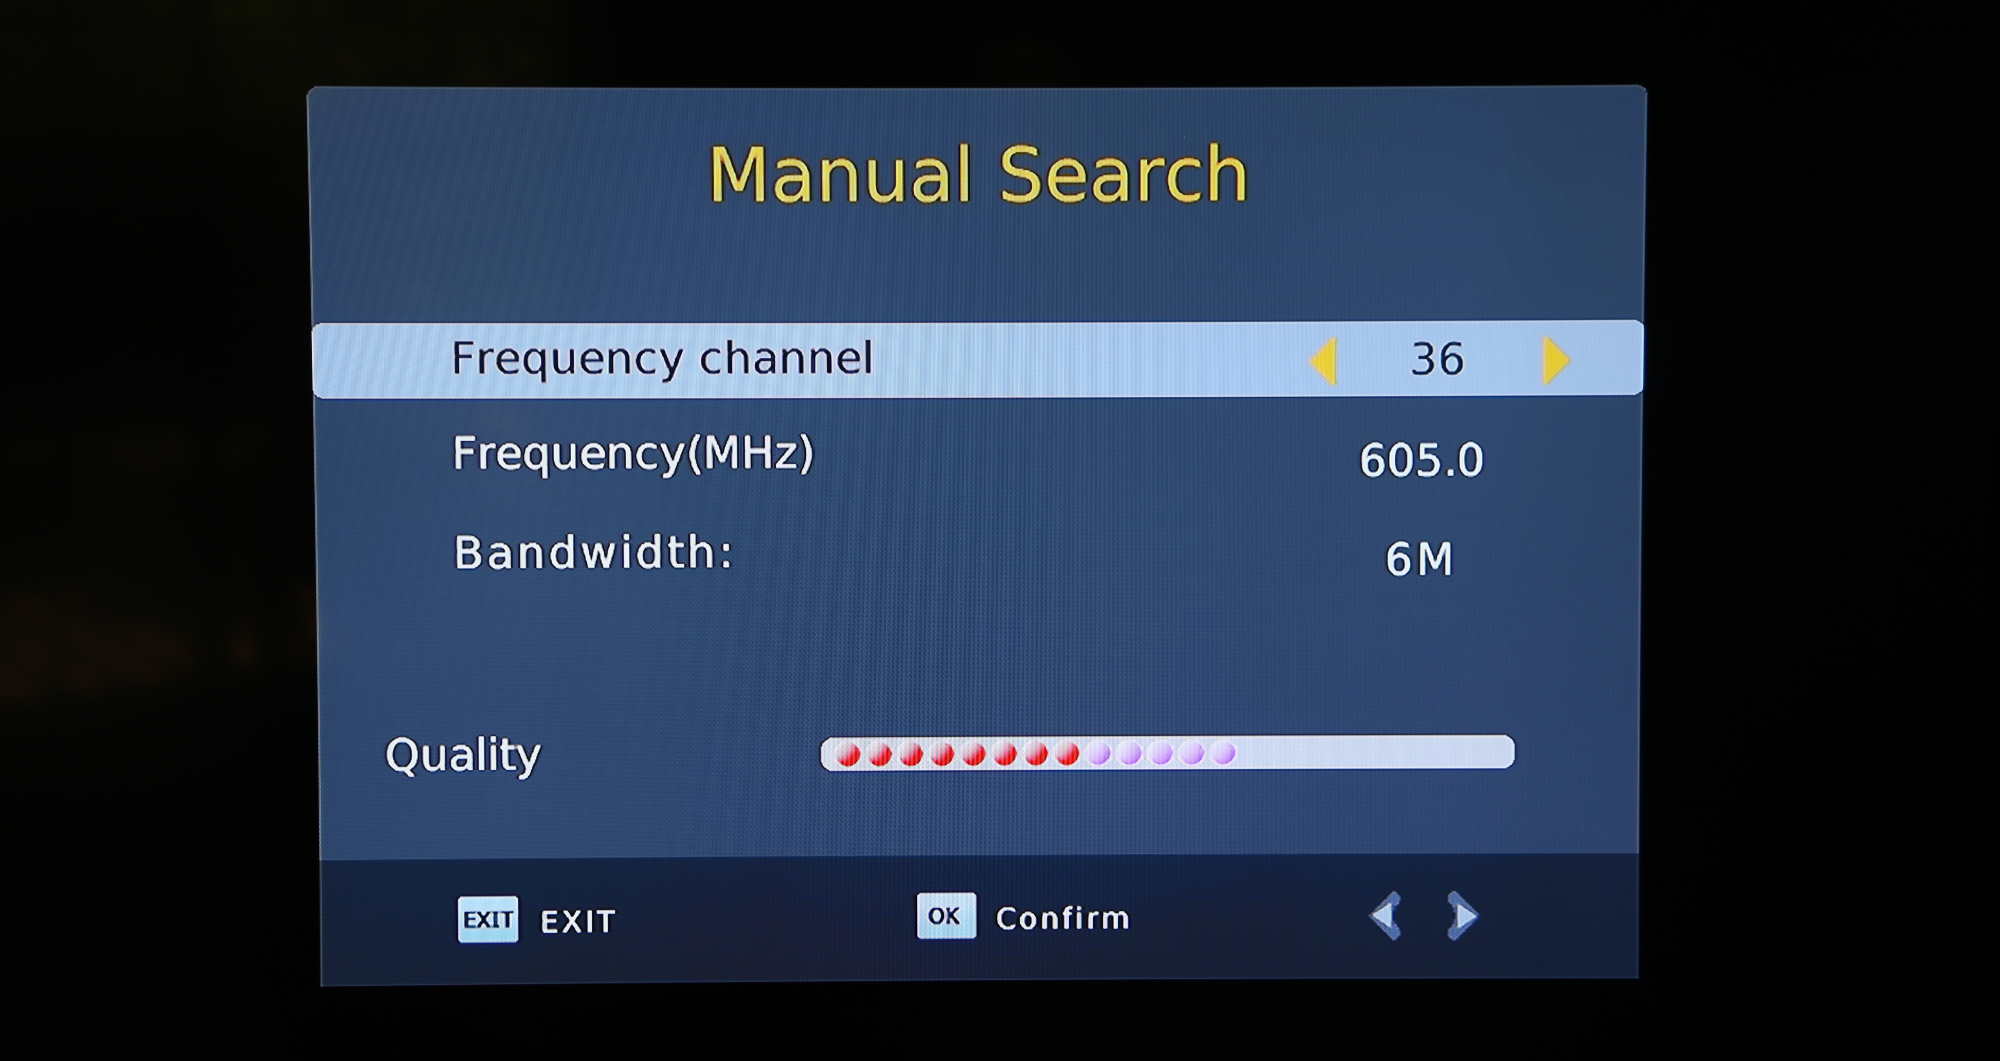 Manual channel search page showing signal strength meter ("Quality") on the Mediasonic HOMEWORX converter box